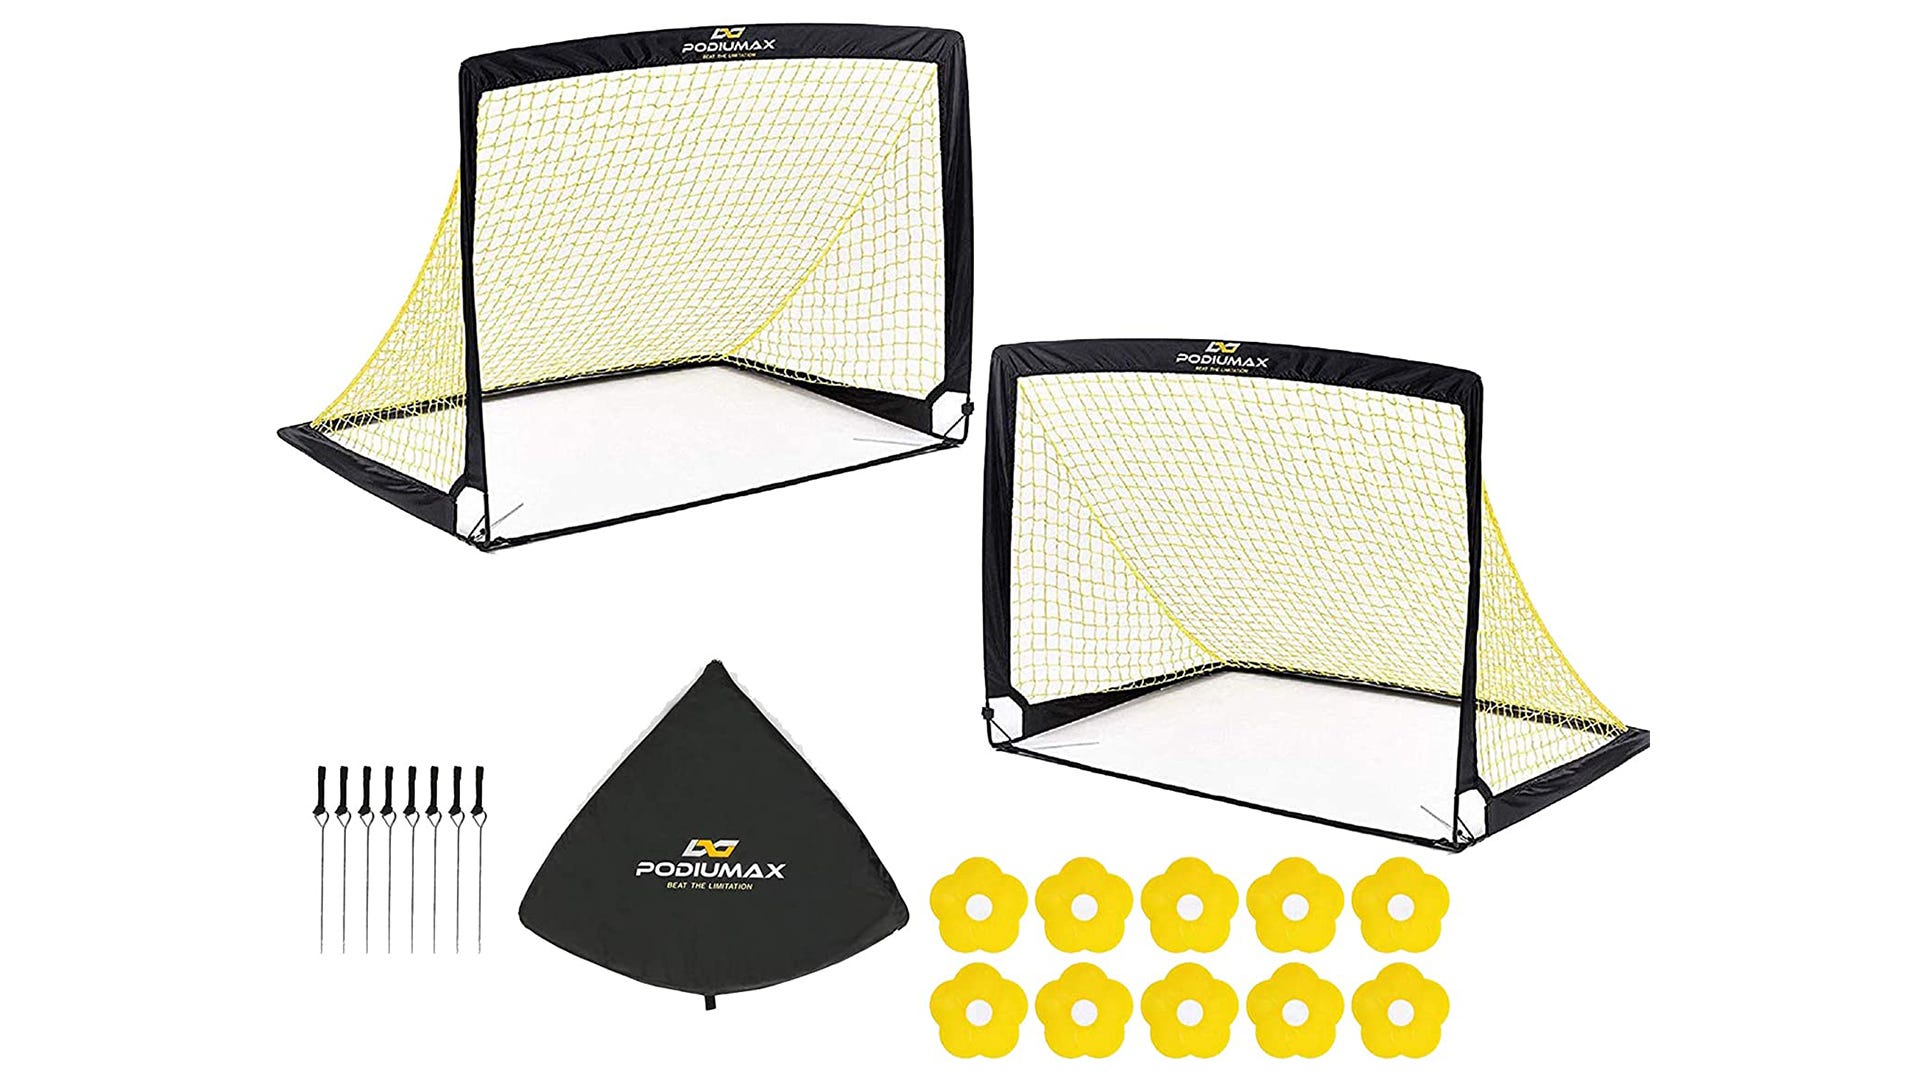 Mitre Kids 2-in-1 Goal and Rebounder Training Aid One Size Black/Yellow